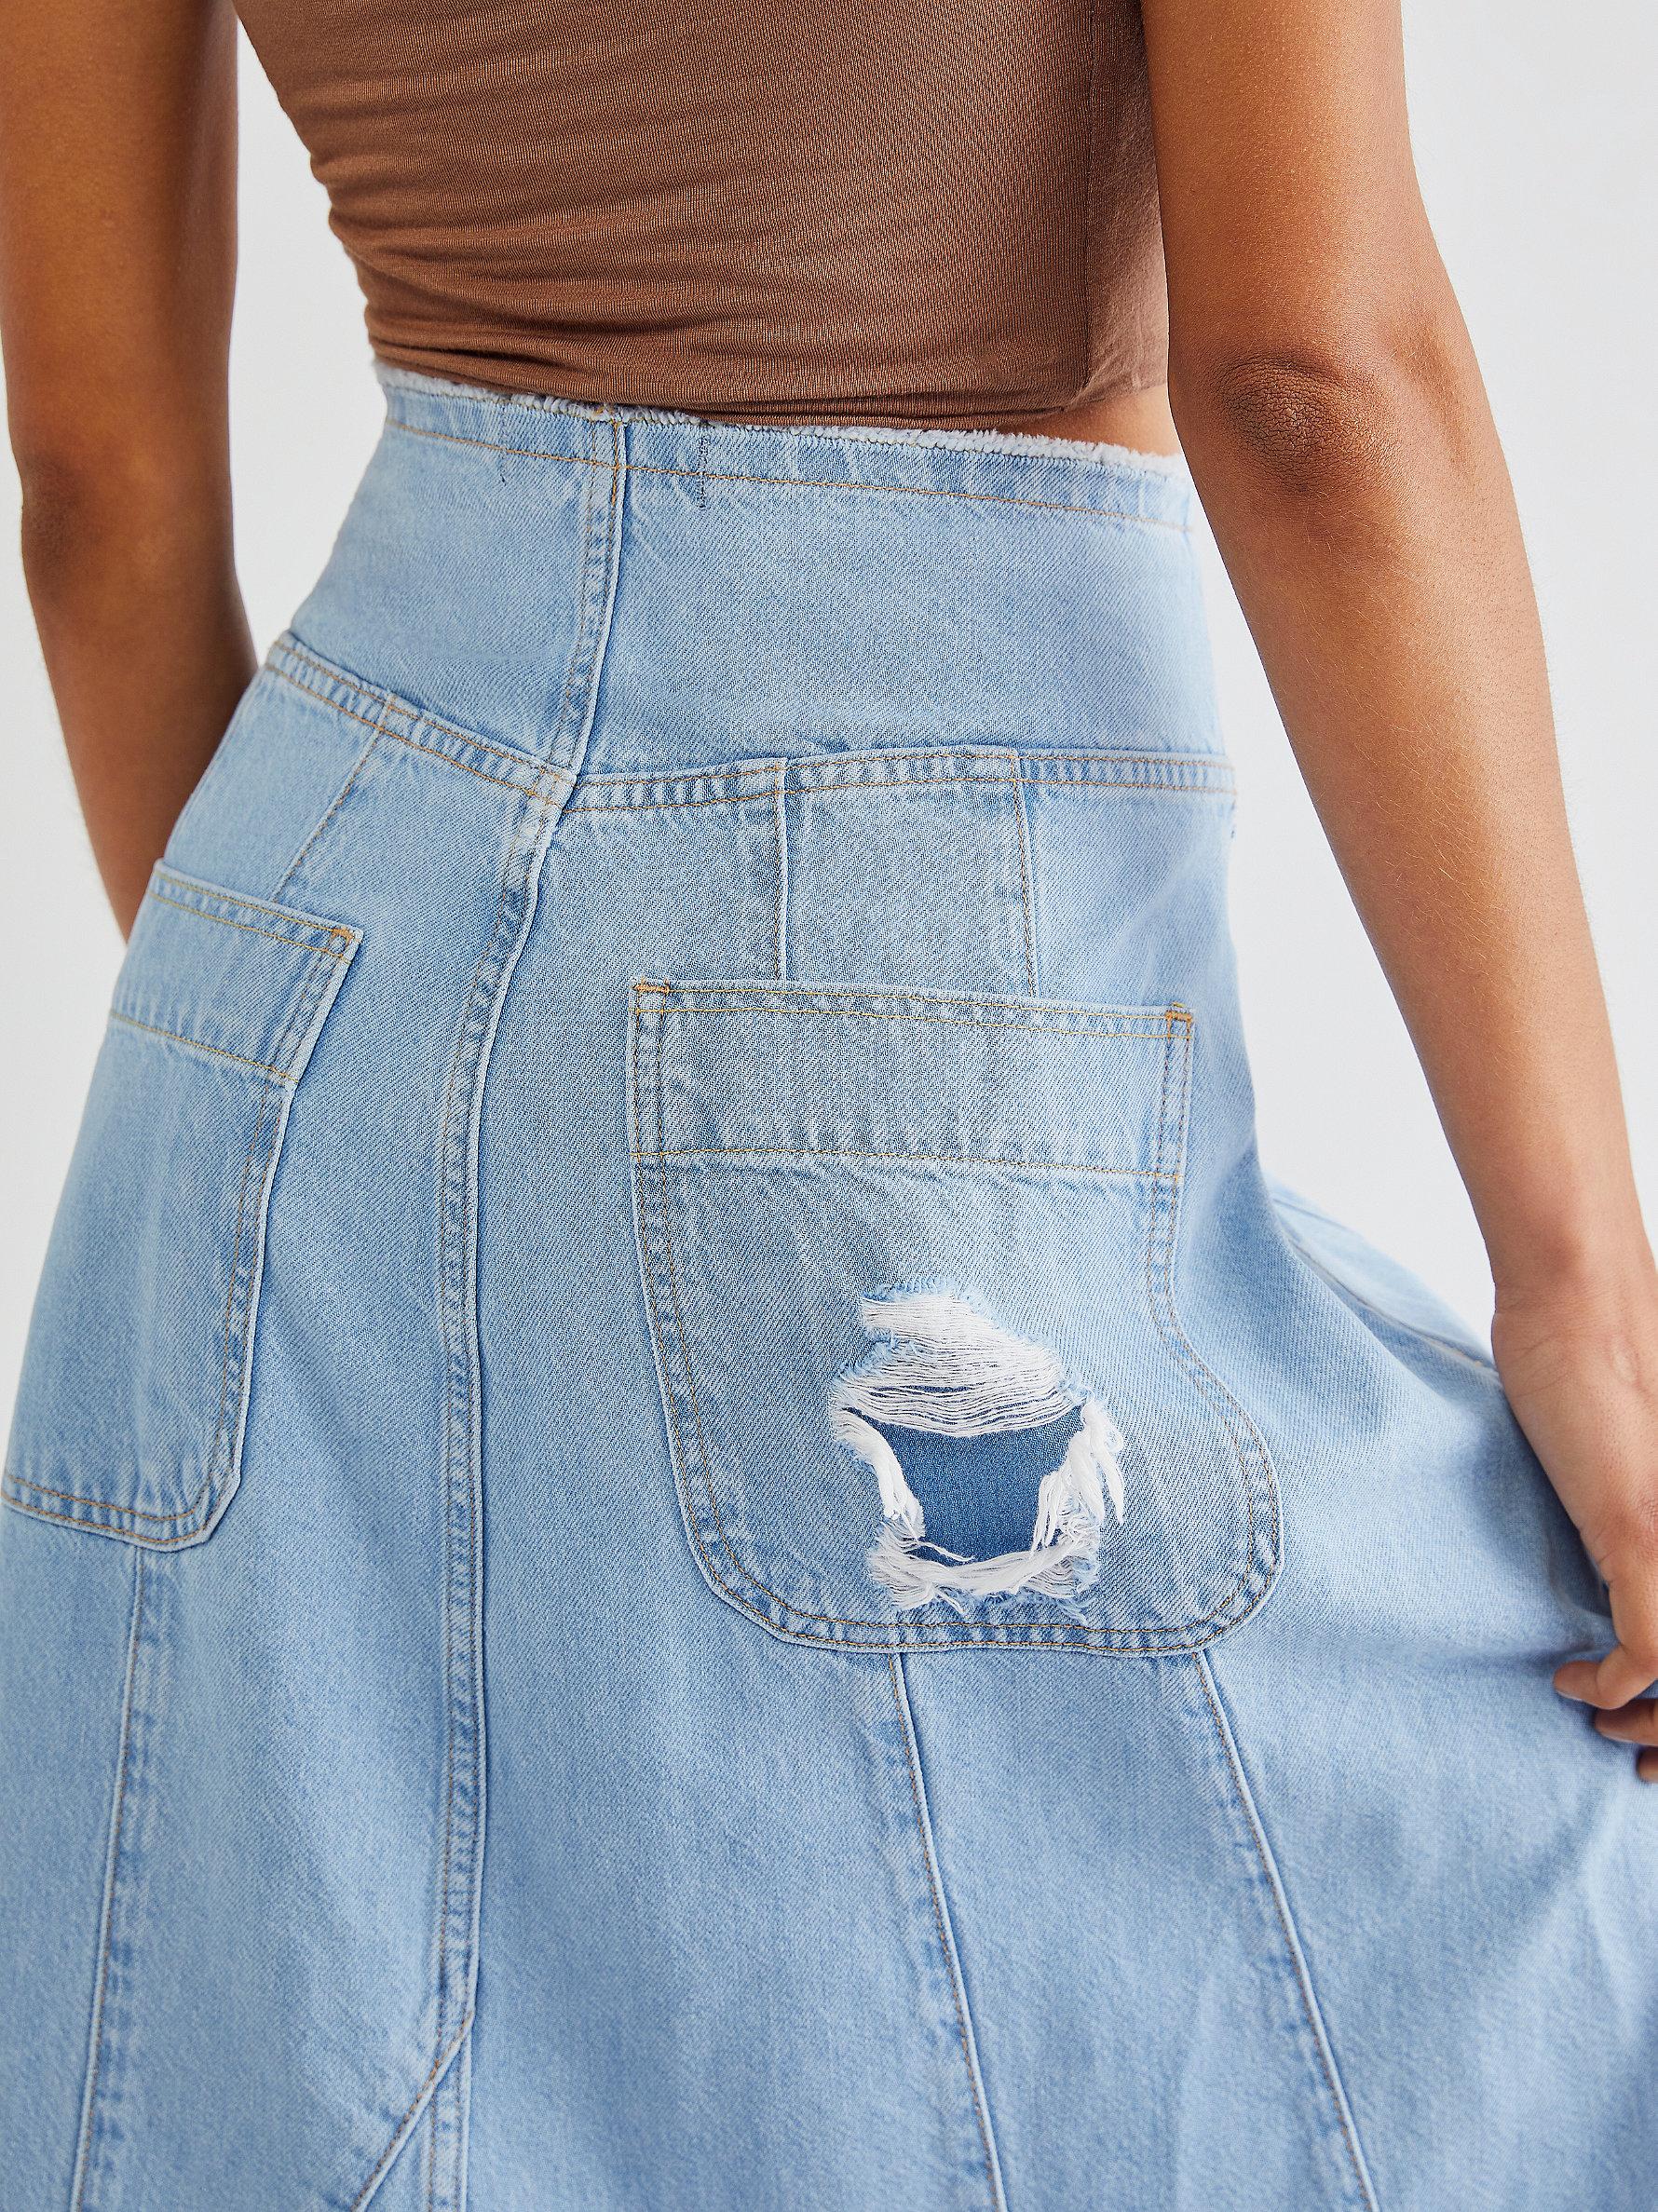 Free People Riptide Maxi Skirt in Blue | Lyst